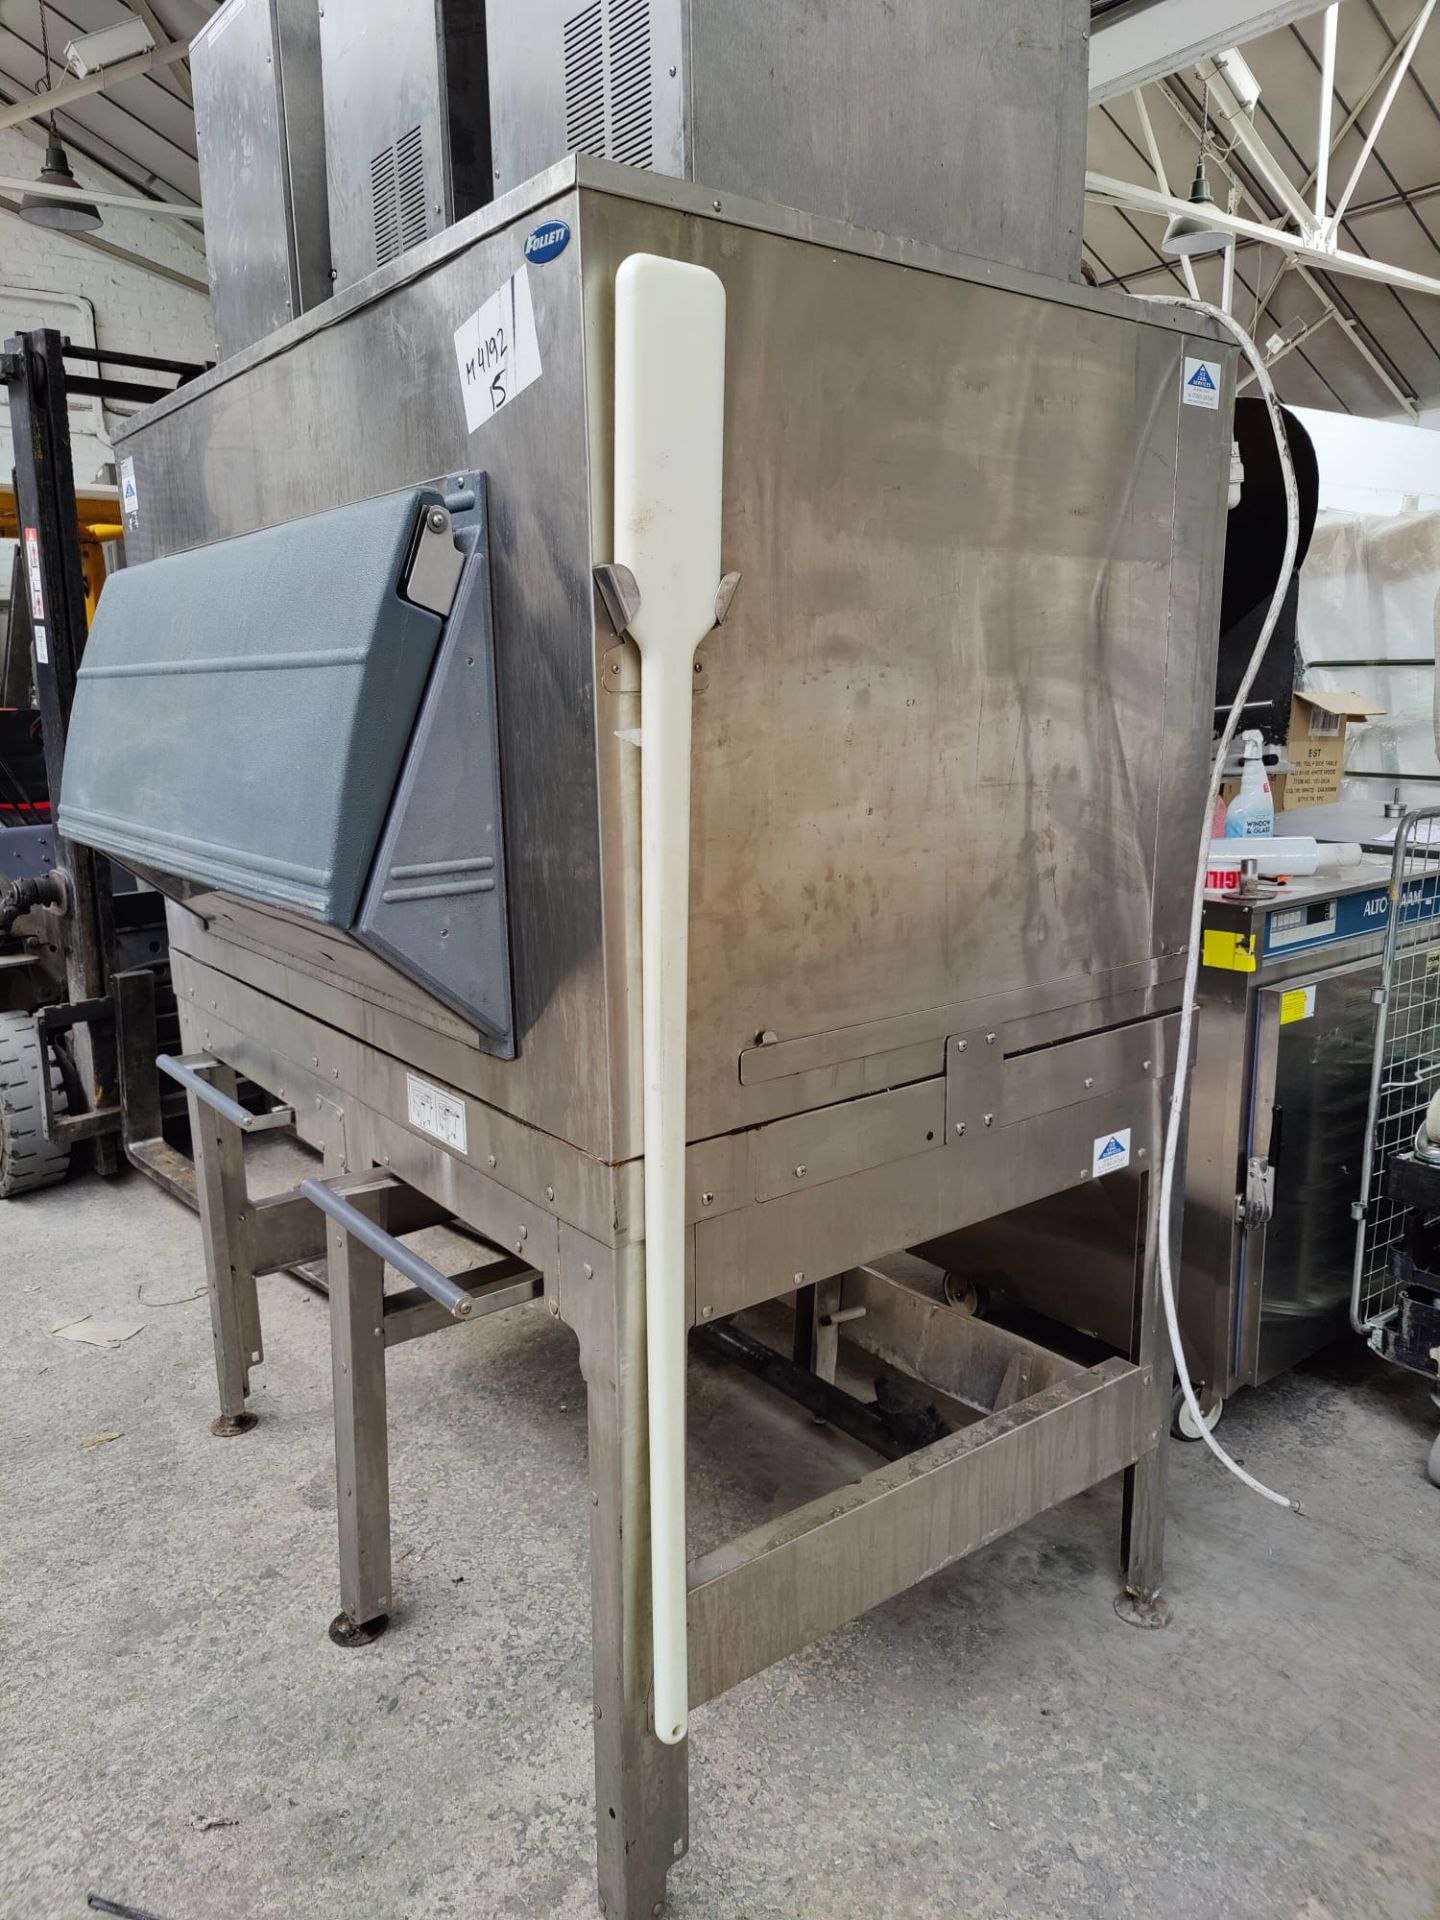 1 x Triple Head Commercial Ice Flaker Machine - Recently Removed From a Supermarket Environment - Image 10 of 11